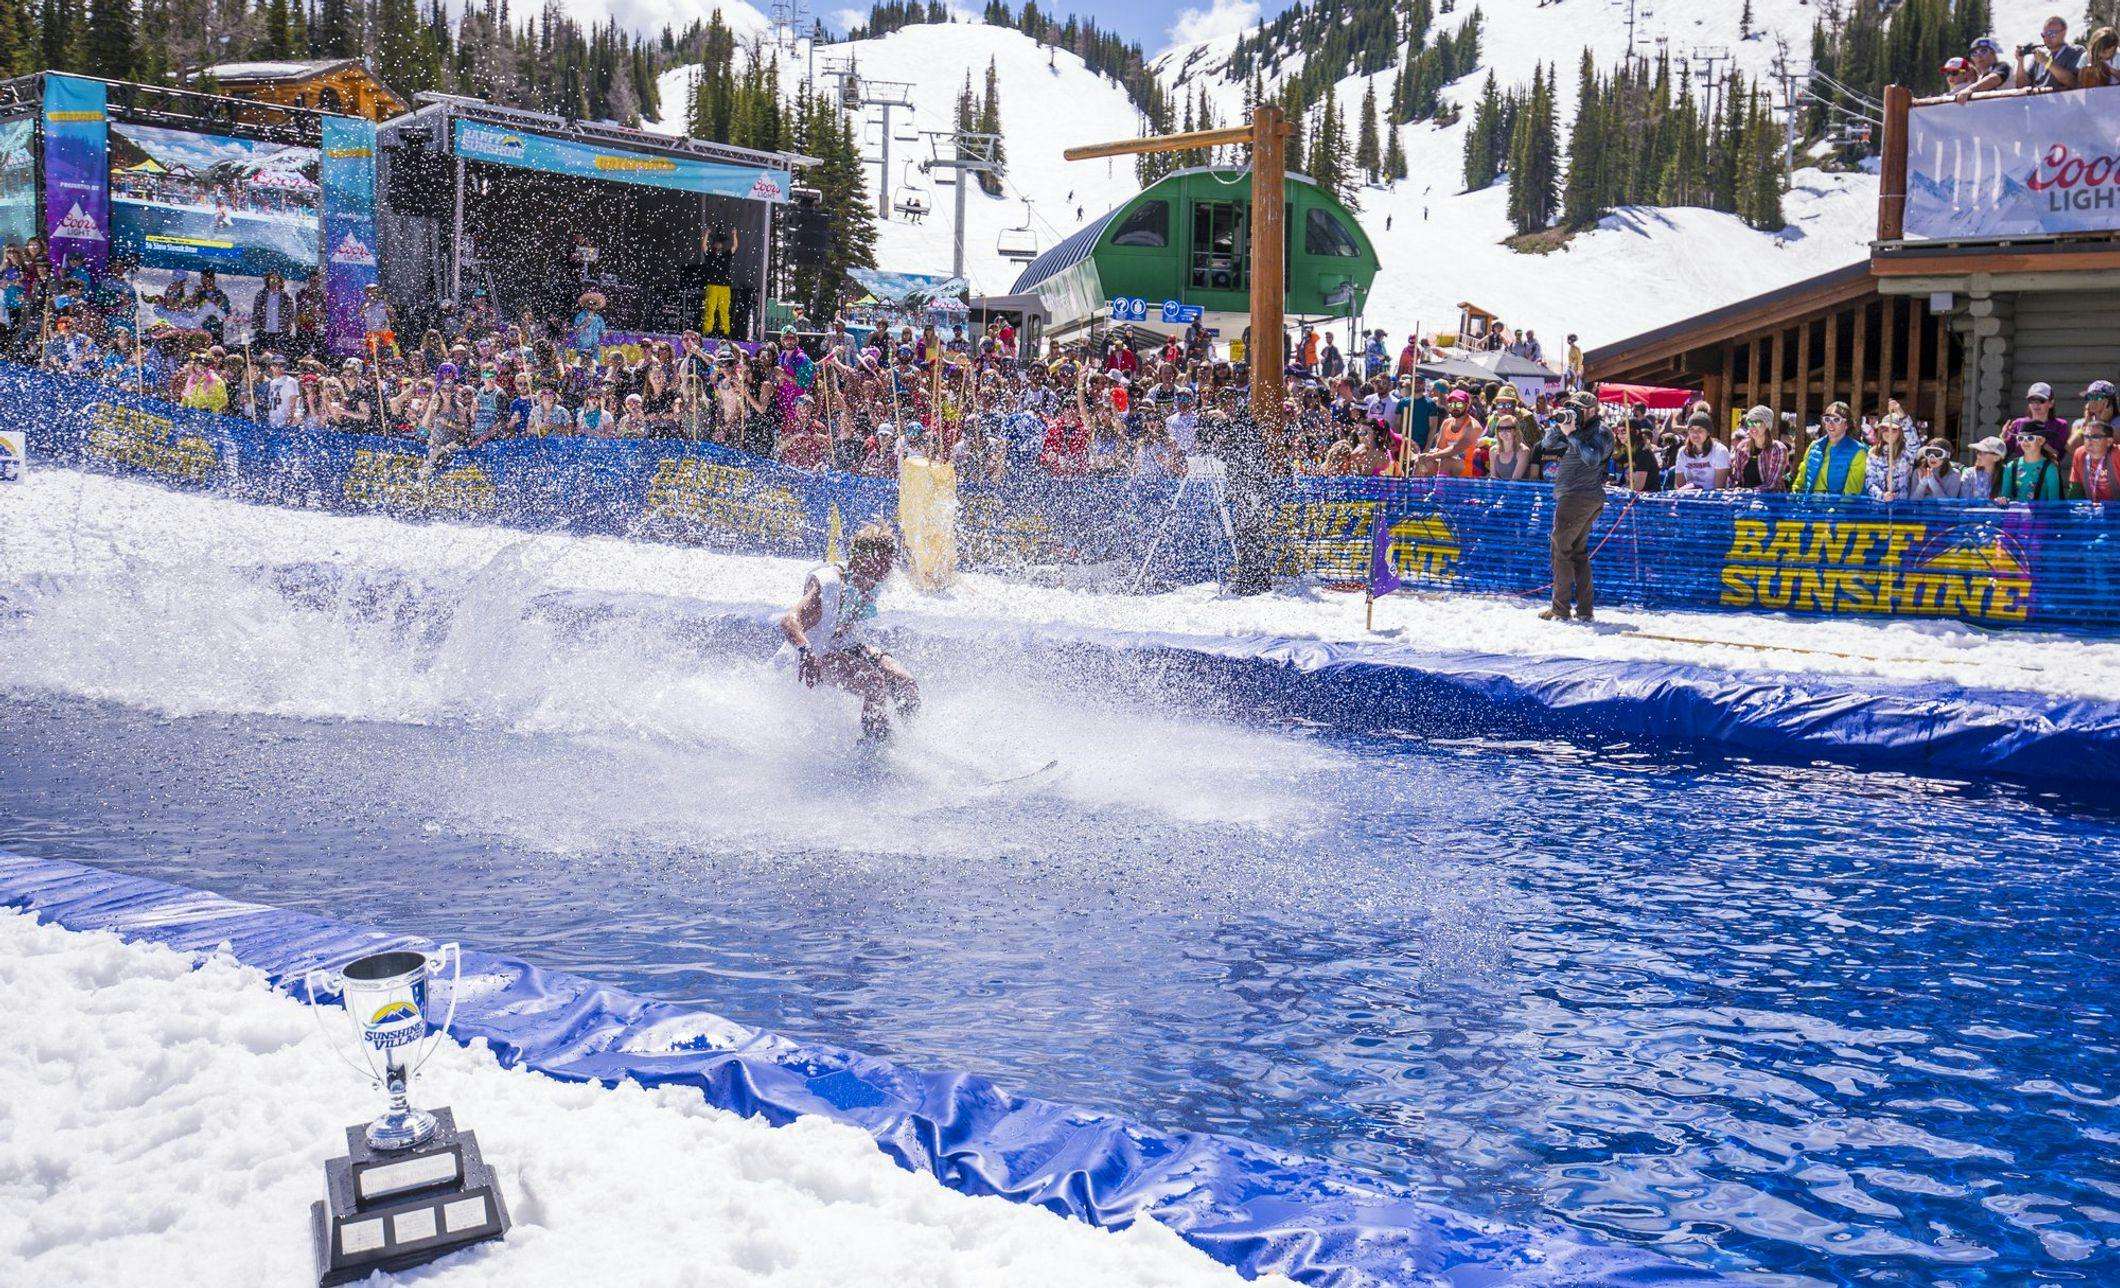 A skier tries to glide across water with a large crowd in the background cheering them on during Slush Cup at Banff Sunshine Village in Banff National Park.